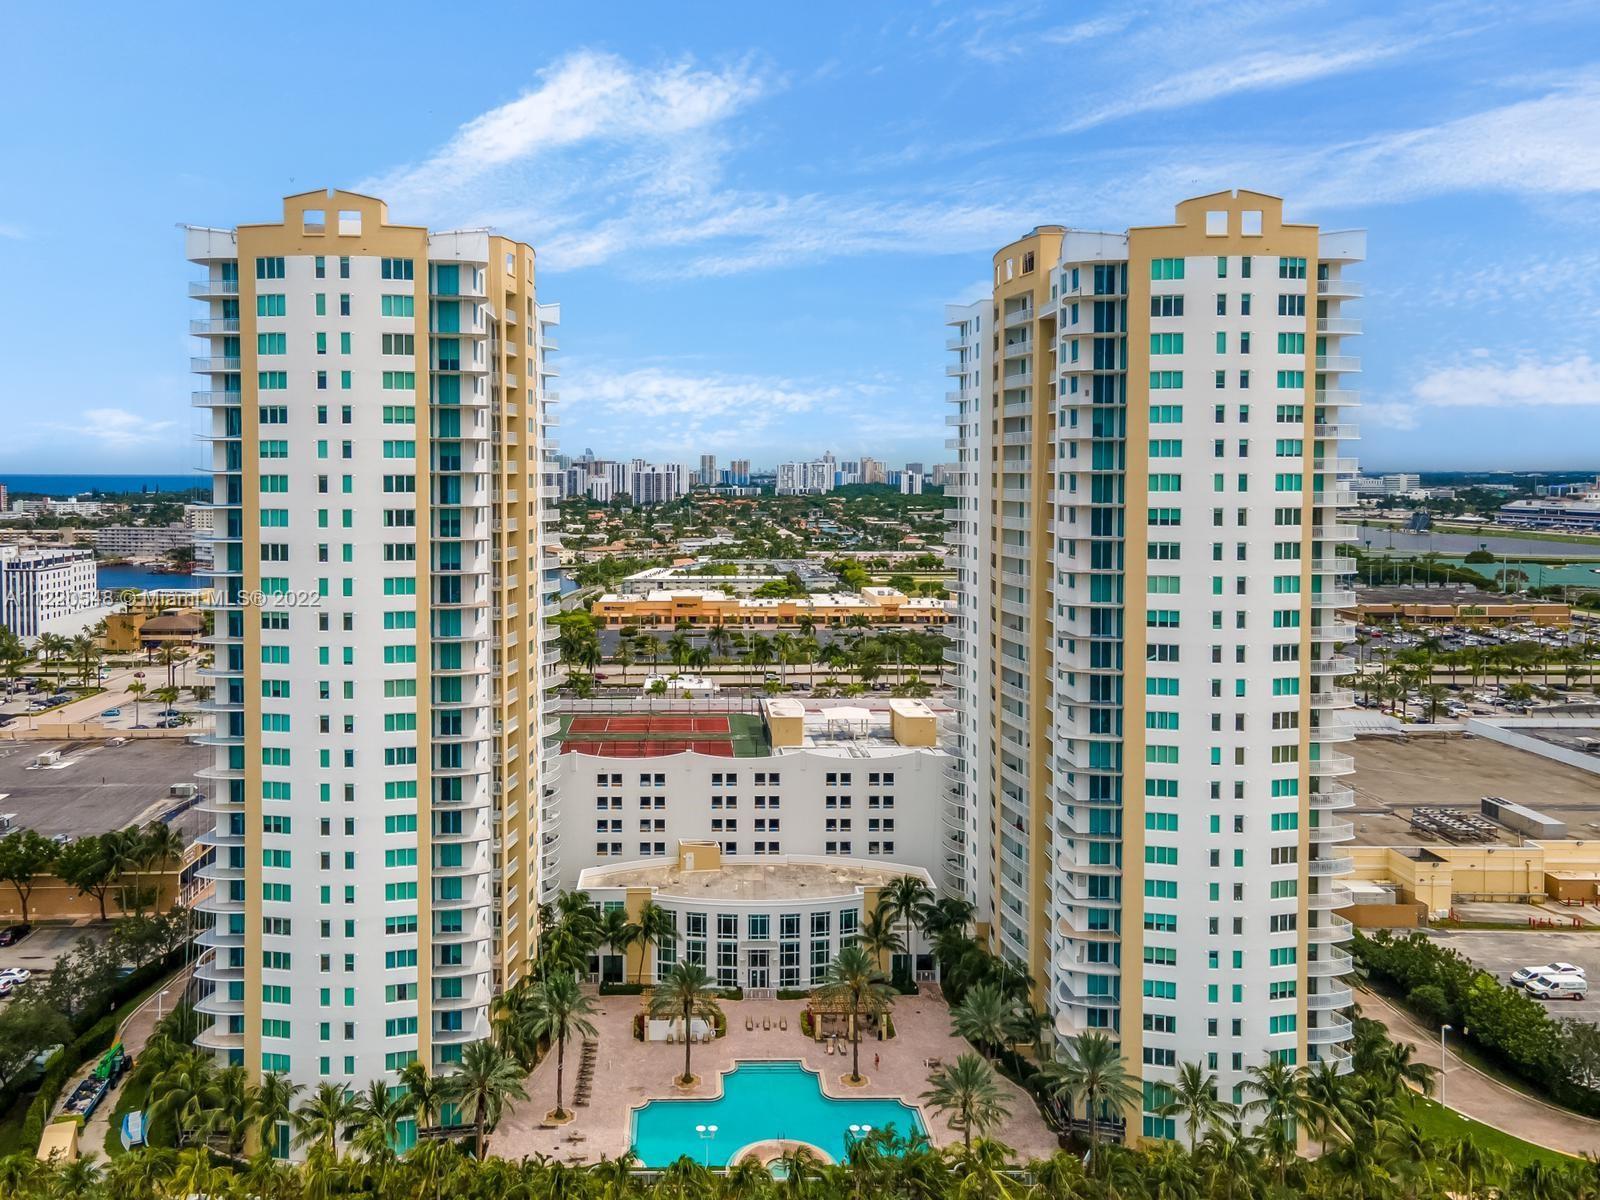 STUNNING VIEW APARTMENT…
Rarely available! Super cozy apt. on 20TH floor with Golf Course, Pool, Oc